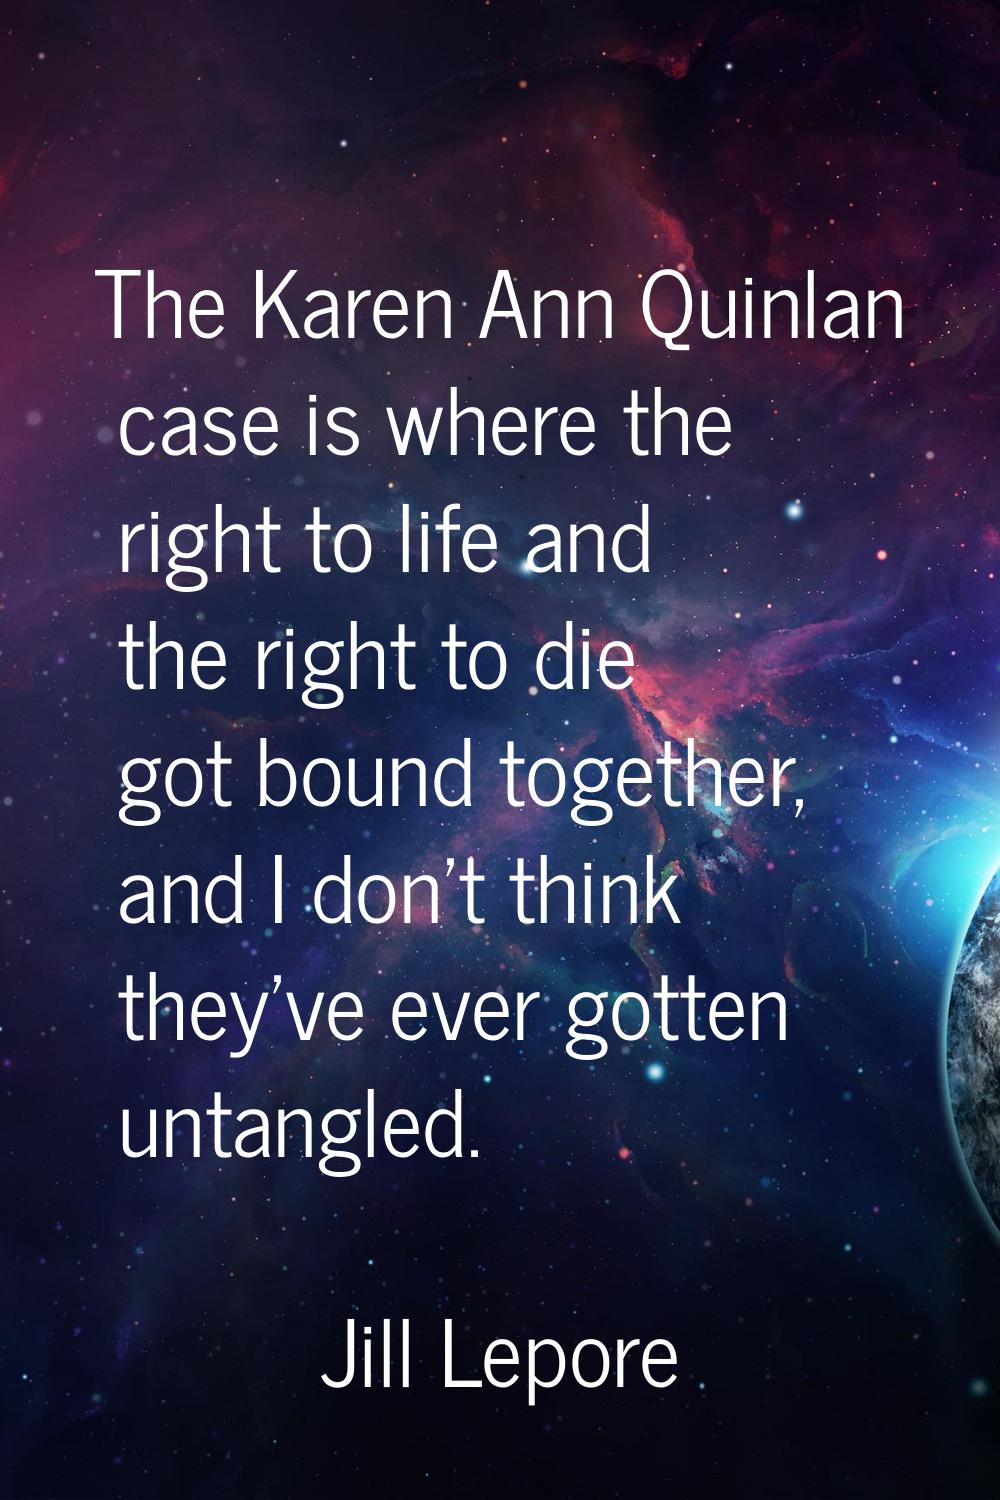 The Karen Ann Quinlan case is where the right to life and the right to die got bound together, and 